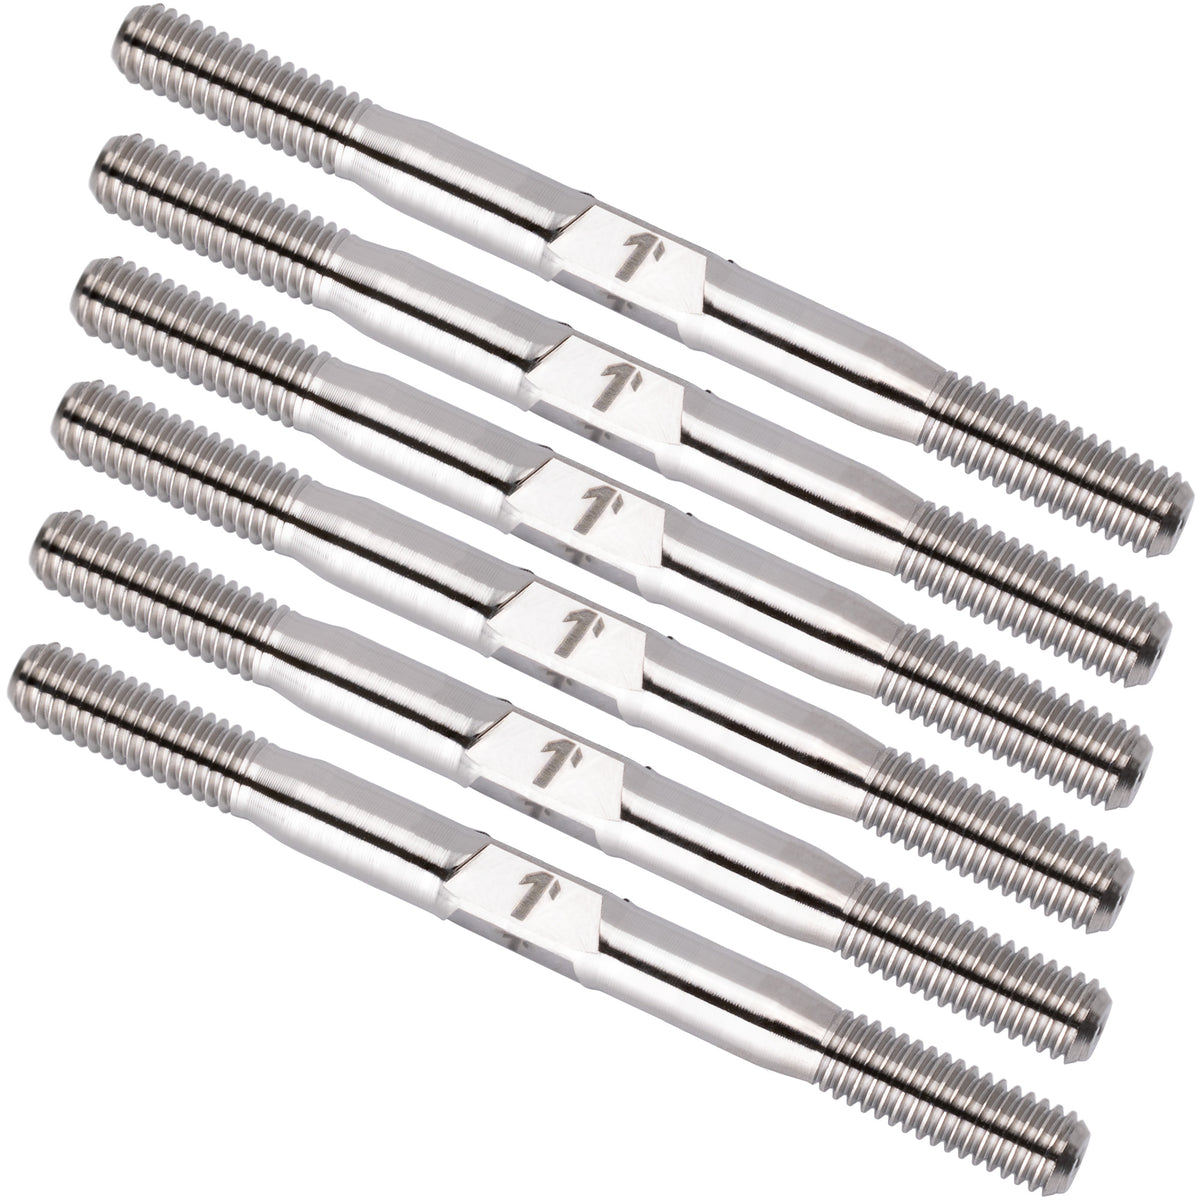 1up Racing Pro Duty Titanium Turnbuckles - TLR 22 5.0